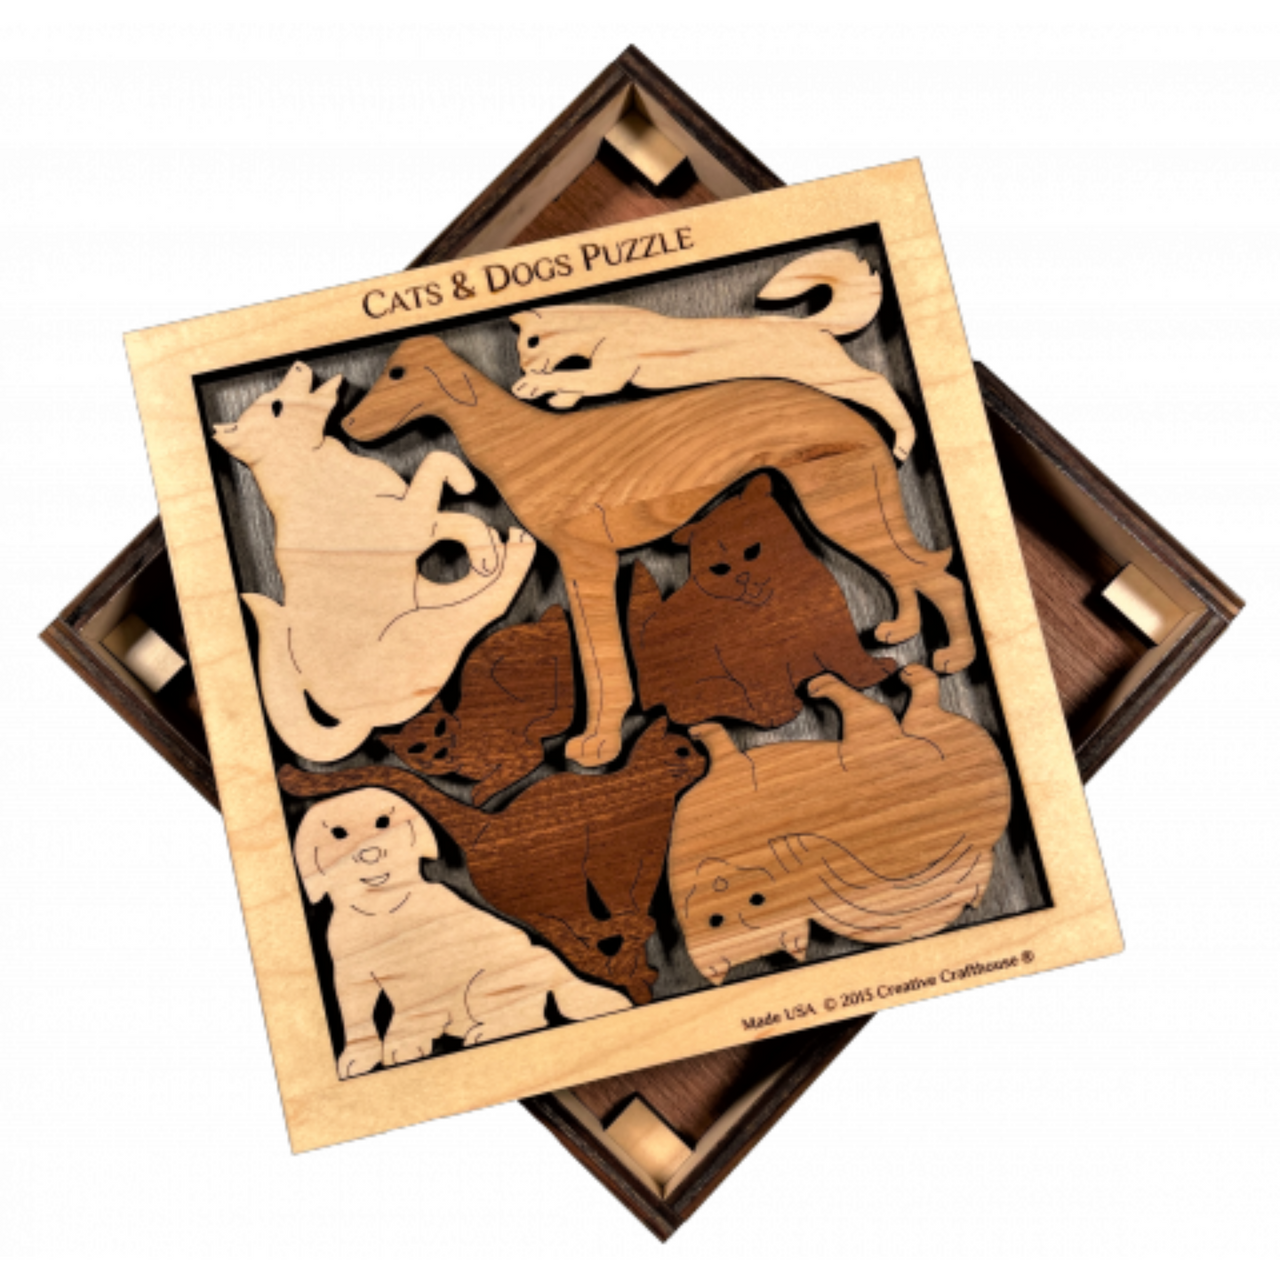 Creative Crafthouse: Cats & Dogs Puzzle